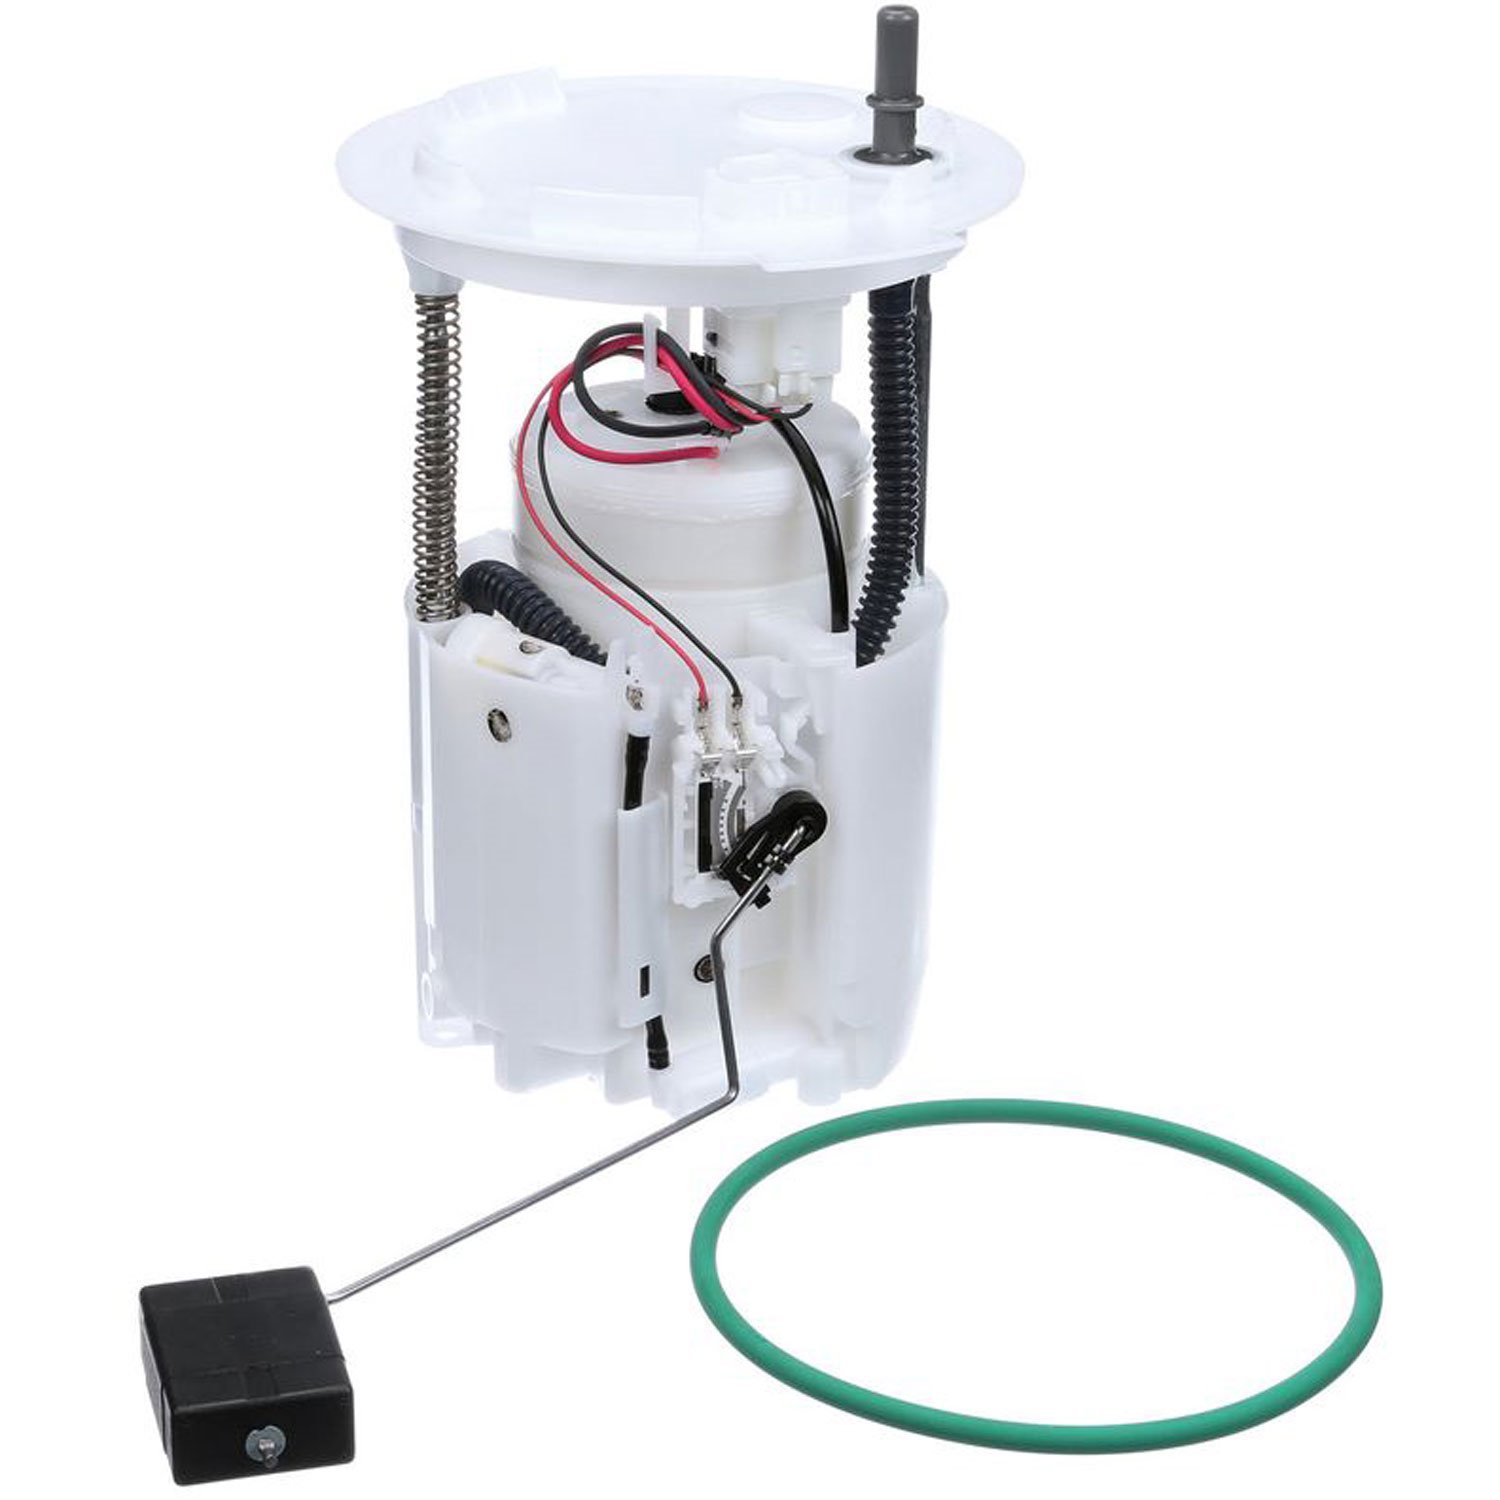 OE Ford/Lincoln Electric Fuel Pump Module Assembly for 2013-2015 Ford Fusion/Lincoln MKZ